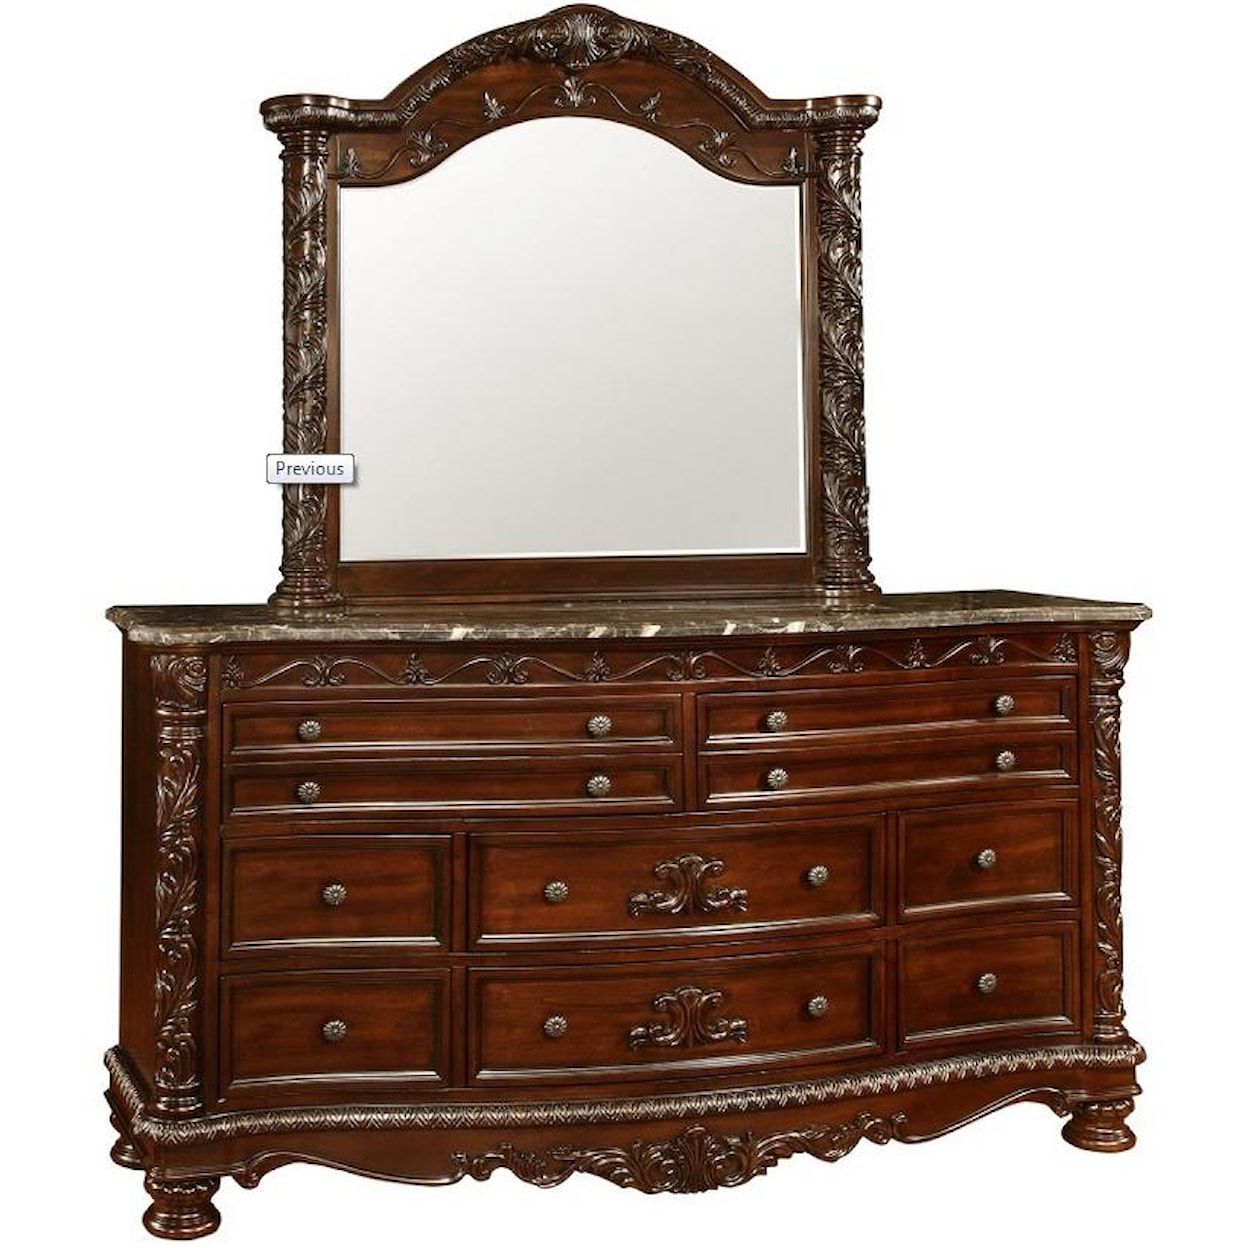 Fairfax Home Furnishings Patterson Dresser and Mirror